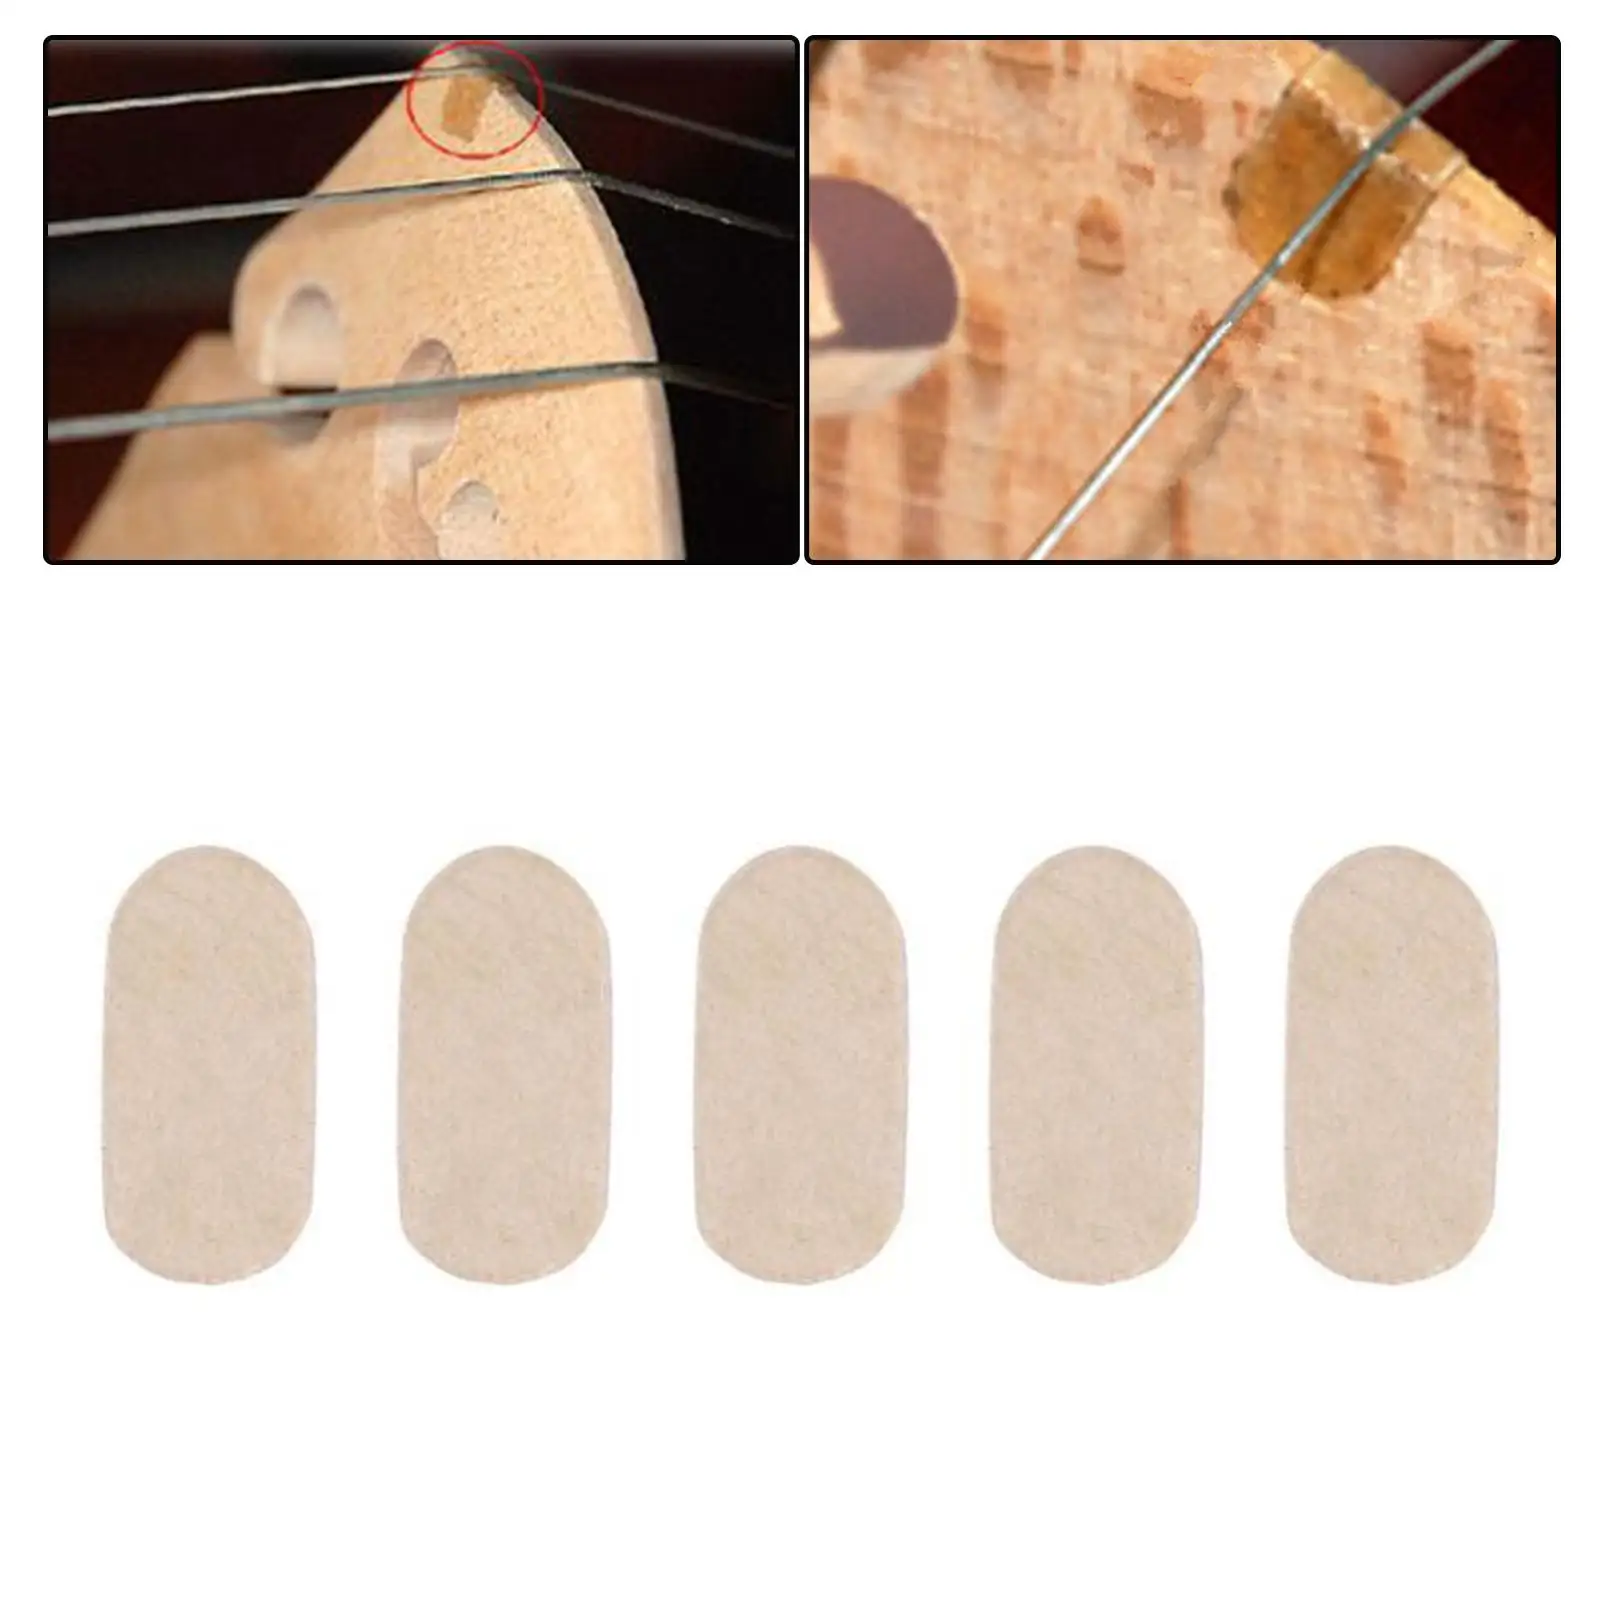 5 Pieces Bridge Parchment Pads Strings Accessories Musical Instruments String Protector for Violin Viola Cello